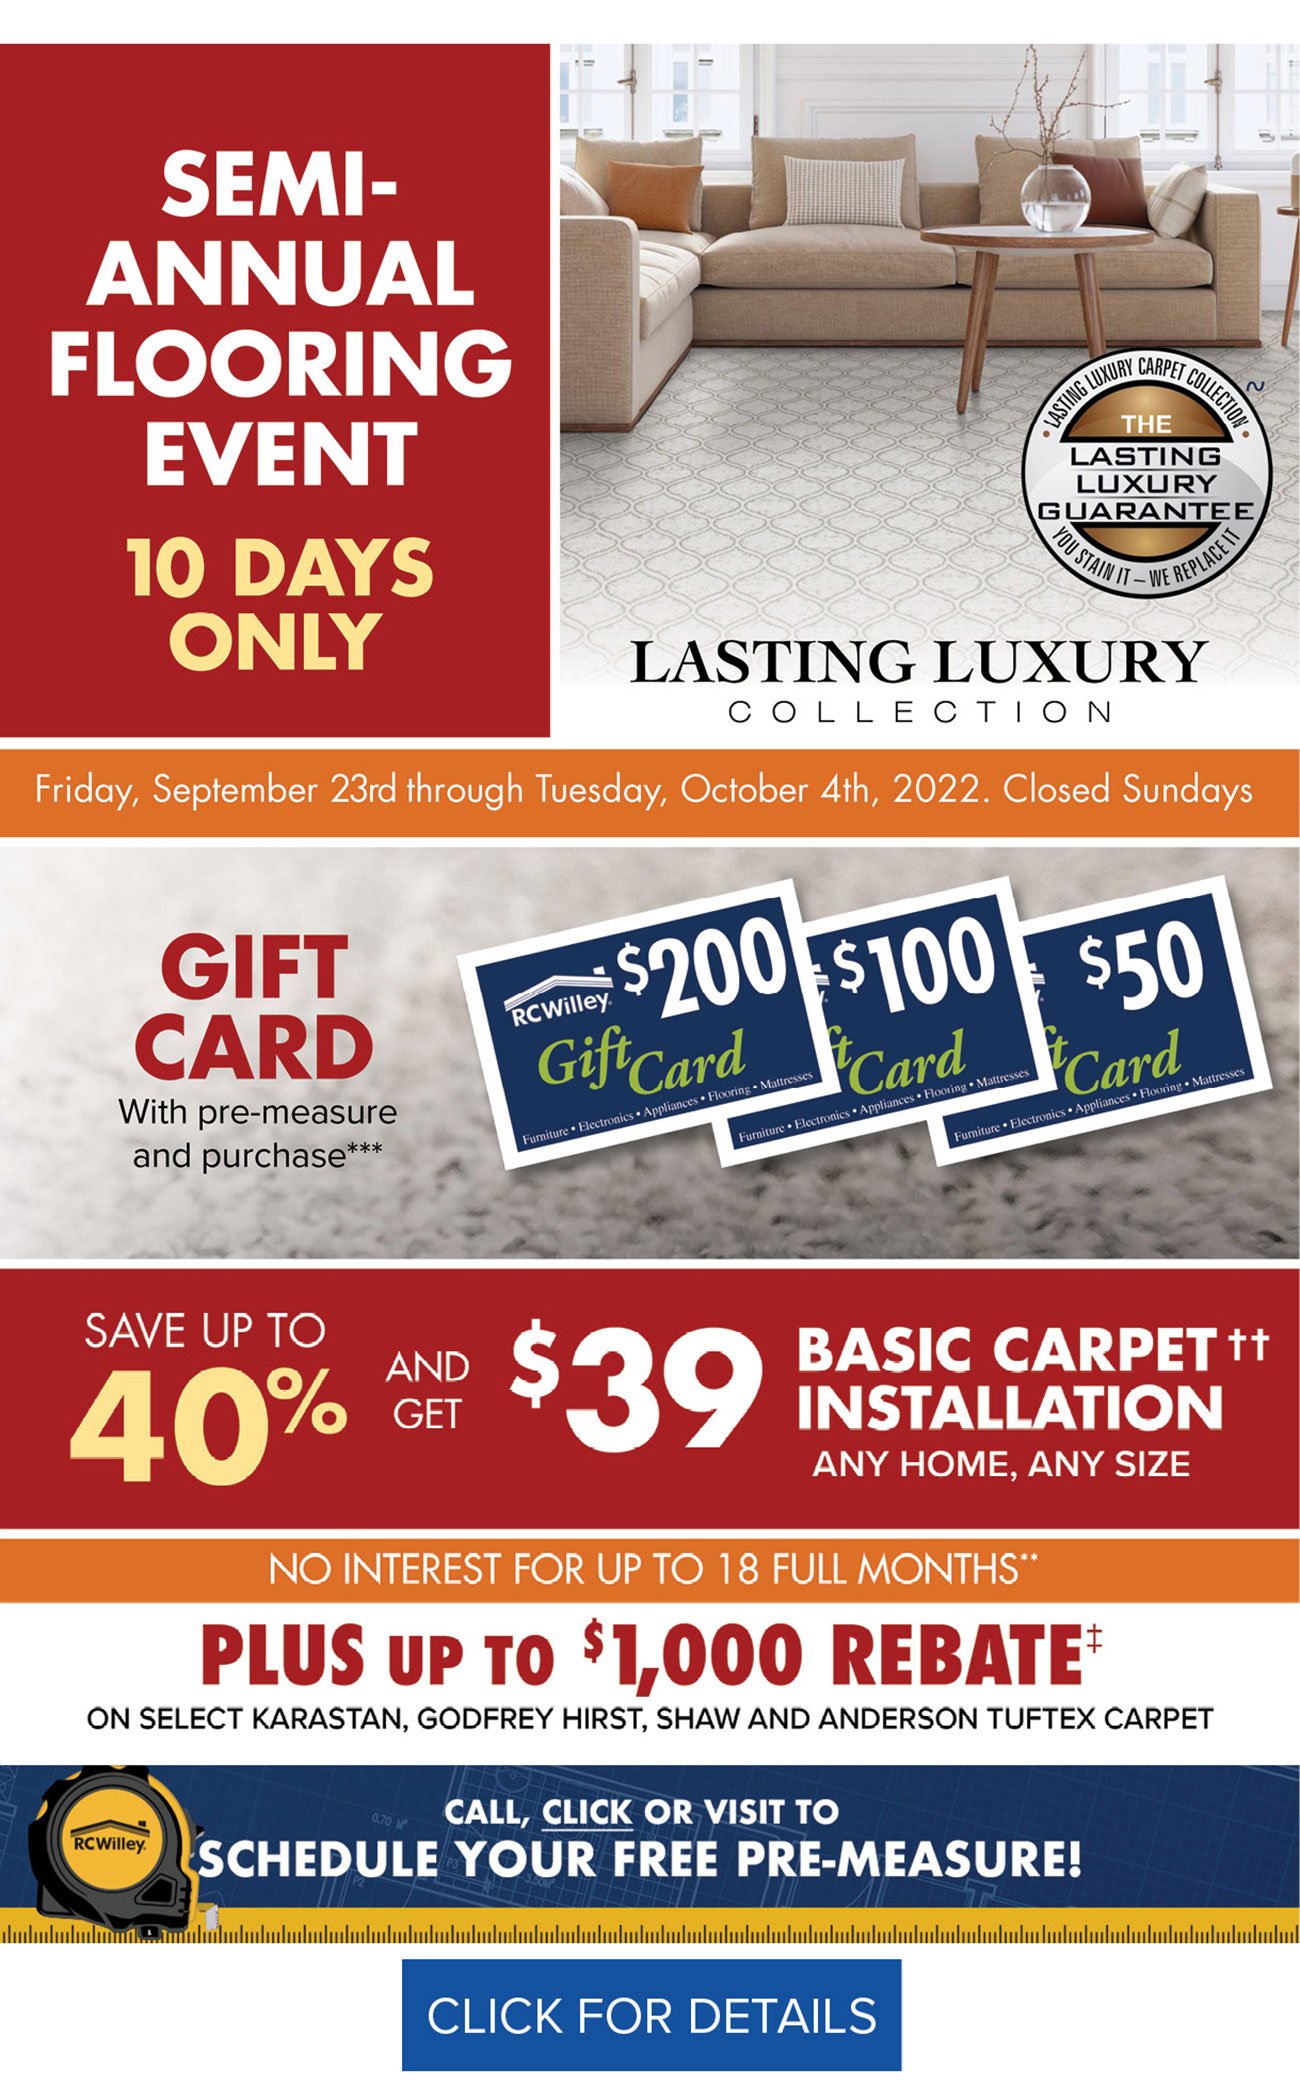  LASTING LUXURY COLLECTION e oy i o With pre-measure and purchase** ON SELECT KARASTAN, GODFREY HIRST, SHAW AND ANDERSON TUFTEX CARPET 4 CALL, CLICK OR VISIT TO SCHEDULE YOUR FREE PRE-MEASURE! ool e O o bona oo loonbnsl sl sl bbbt bbb bbbl bbbl CLICK FOR DETAILS 